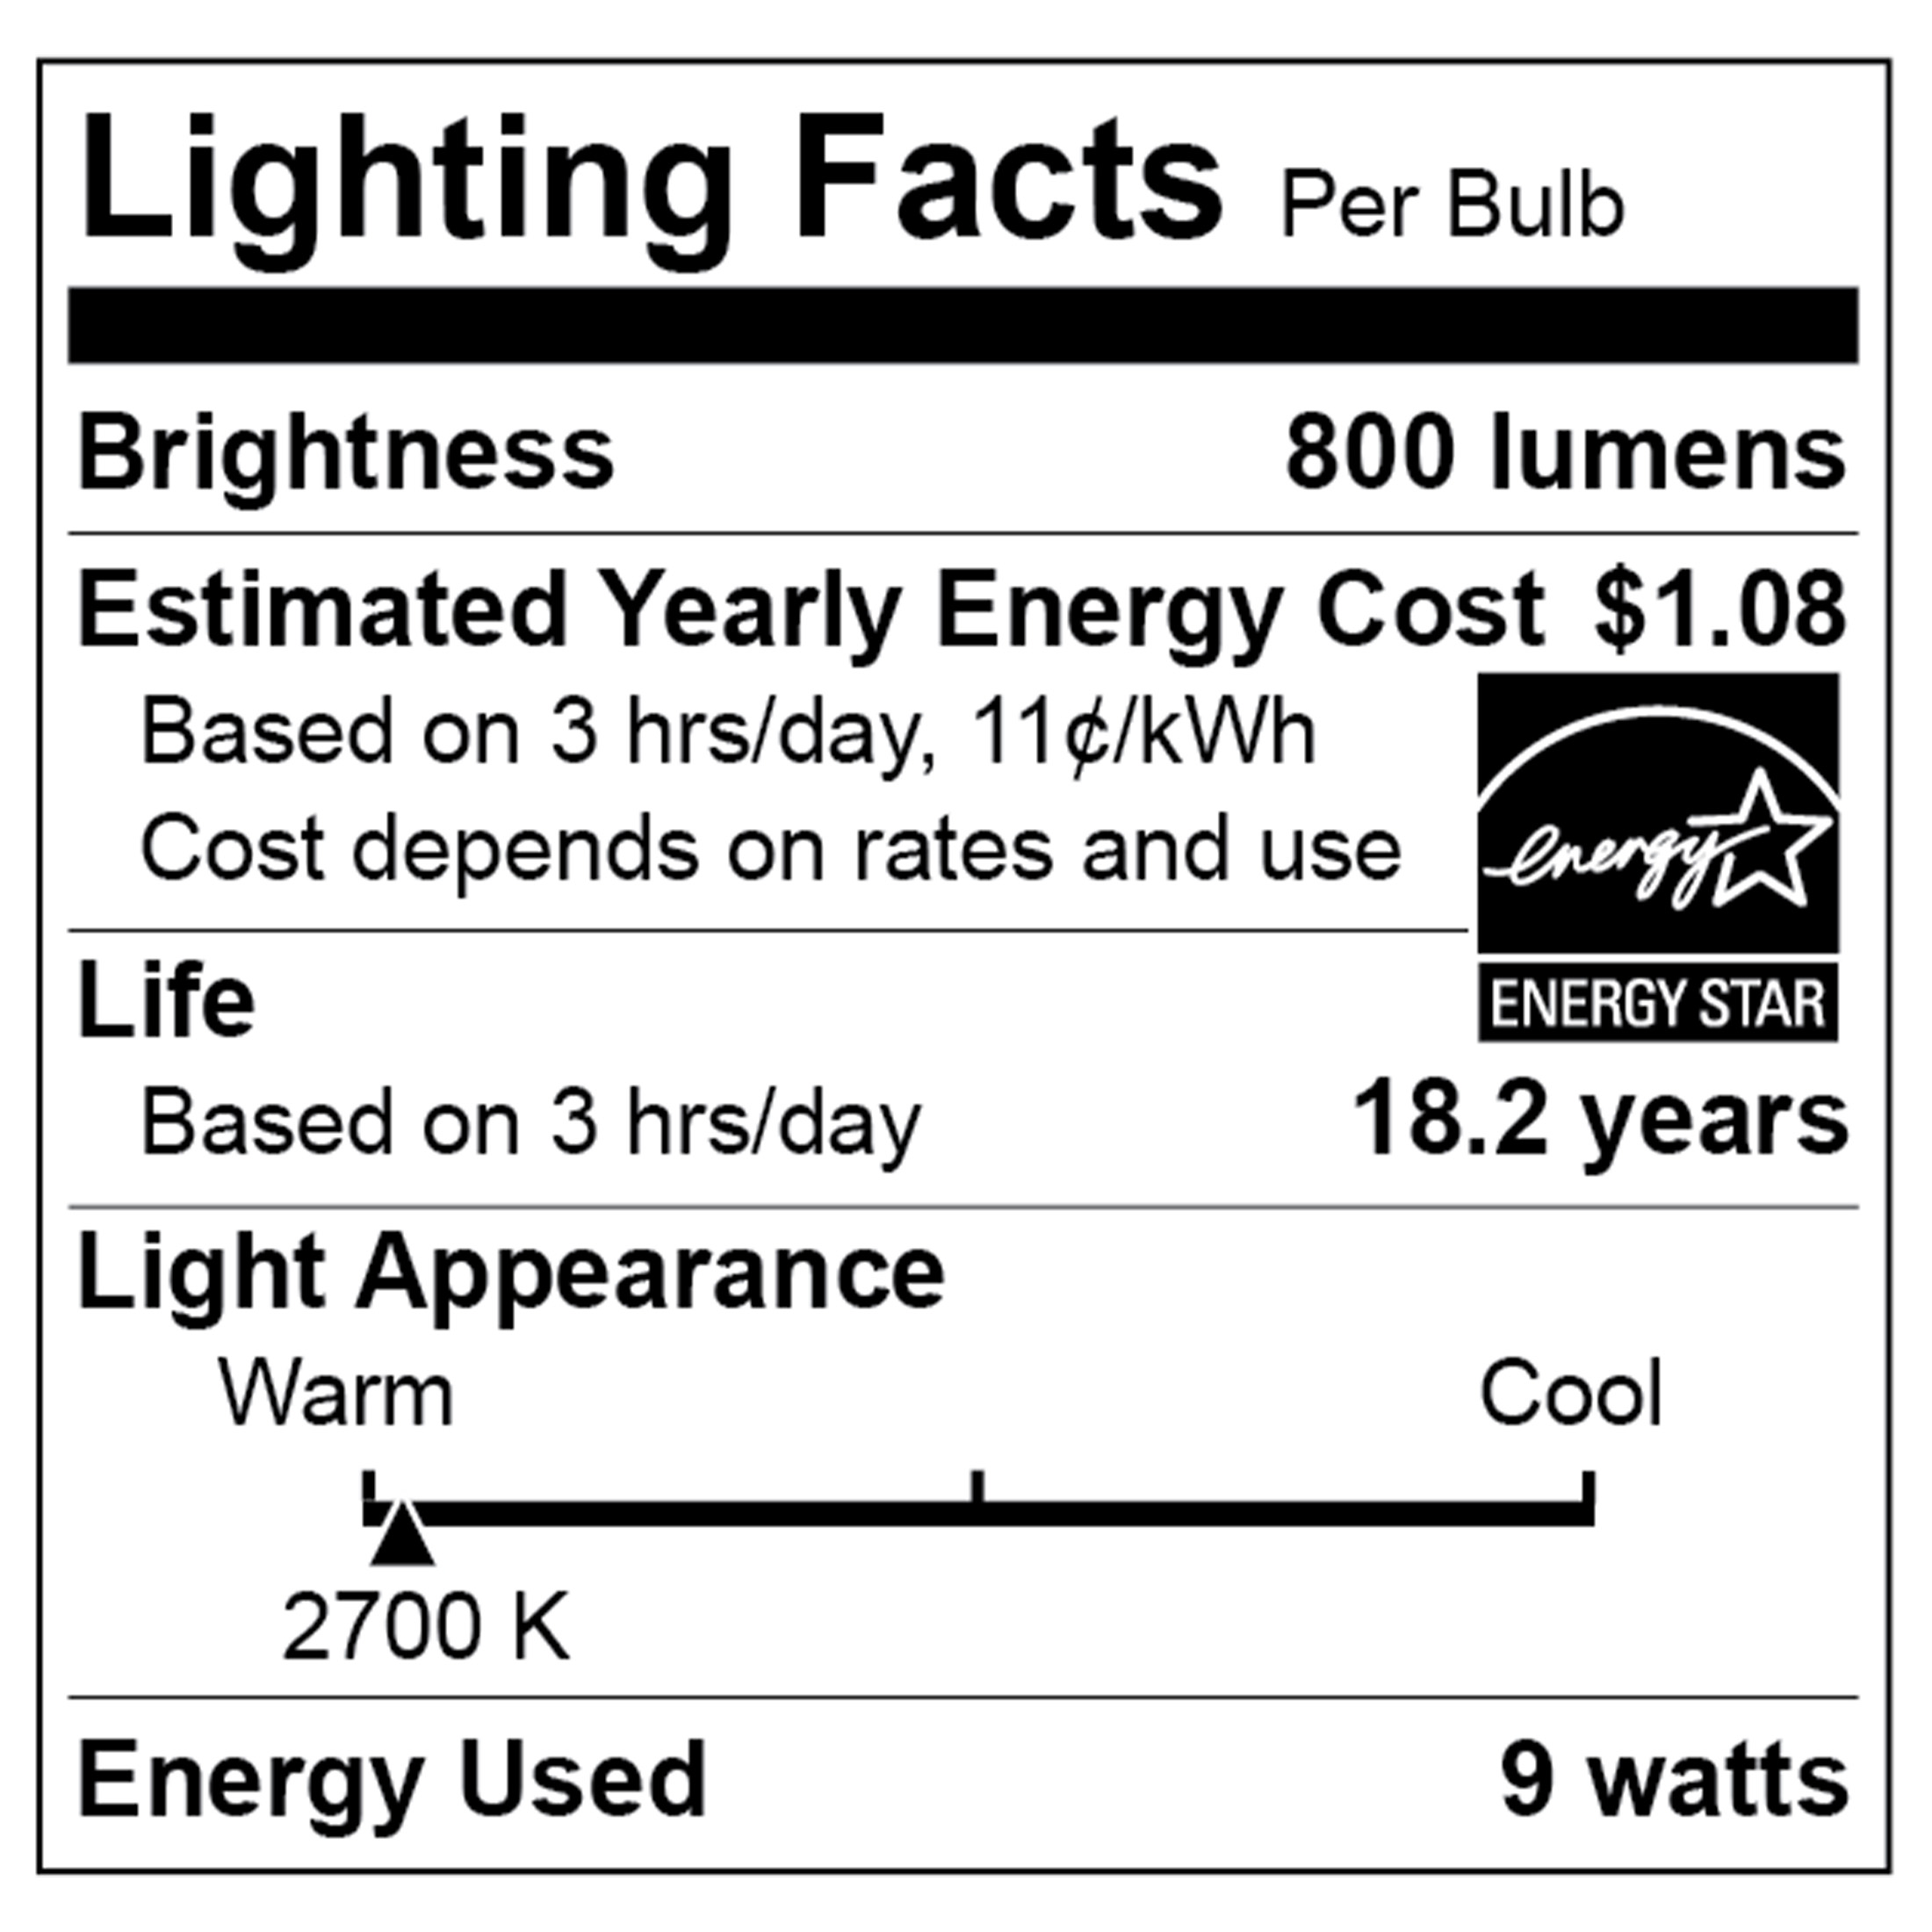 Great Value LED Light Bulb, 9W (60W Equivalent) 18Y, A19 General Purpose Lamp E26 Medium Base, Non-dimmable, Soft White, 4-Pack - image 3 of 8